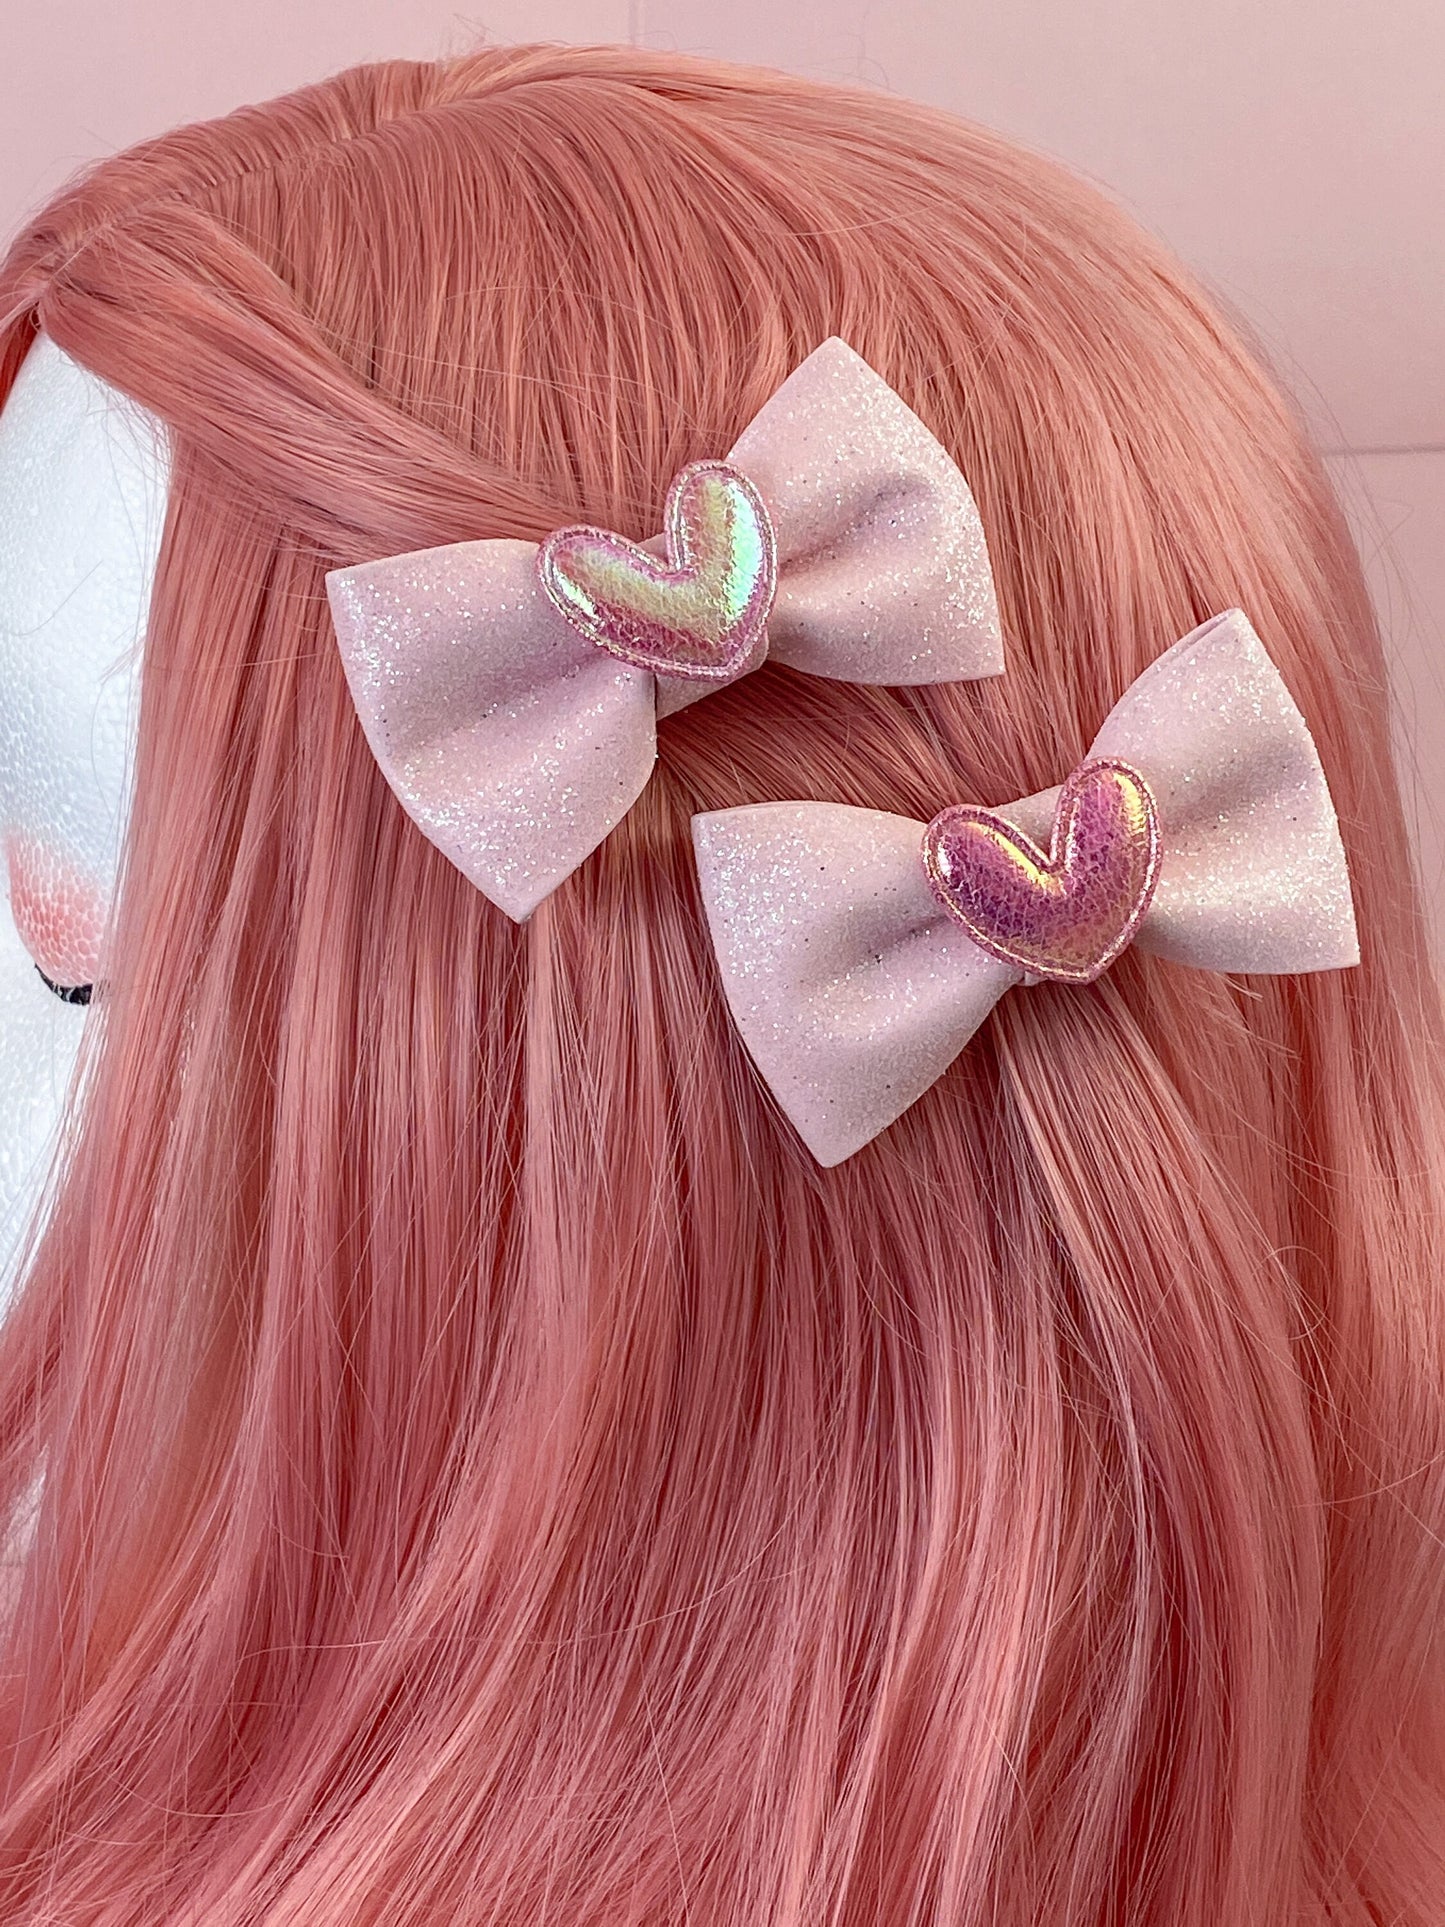 a close up of a person with pink hair